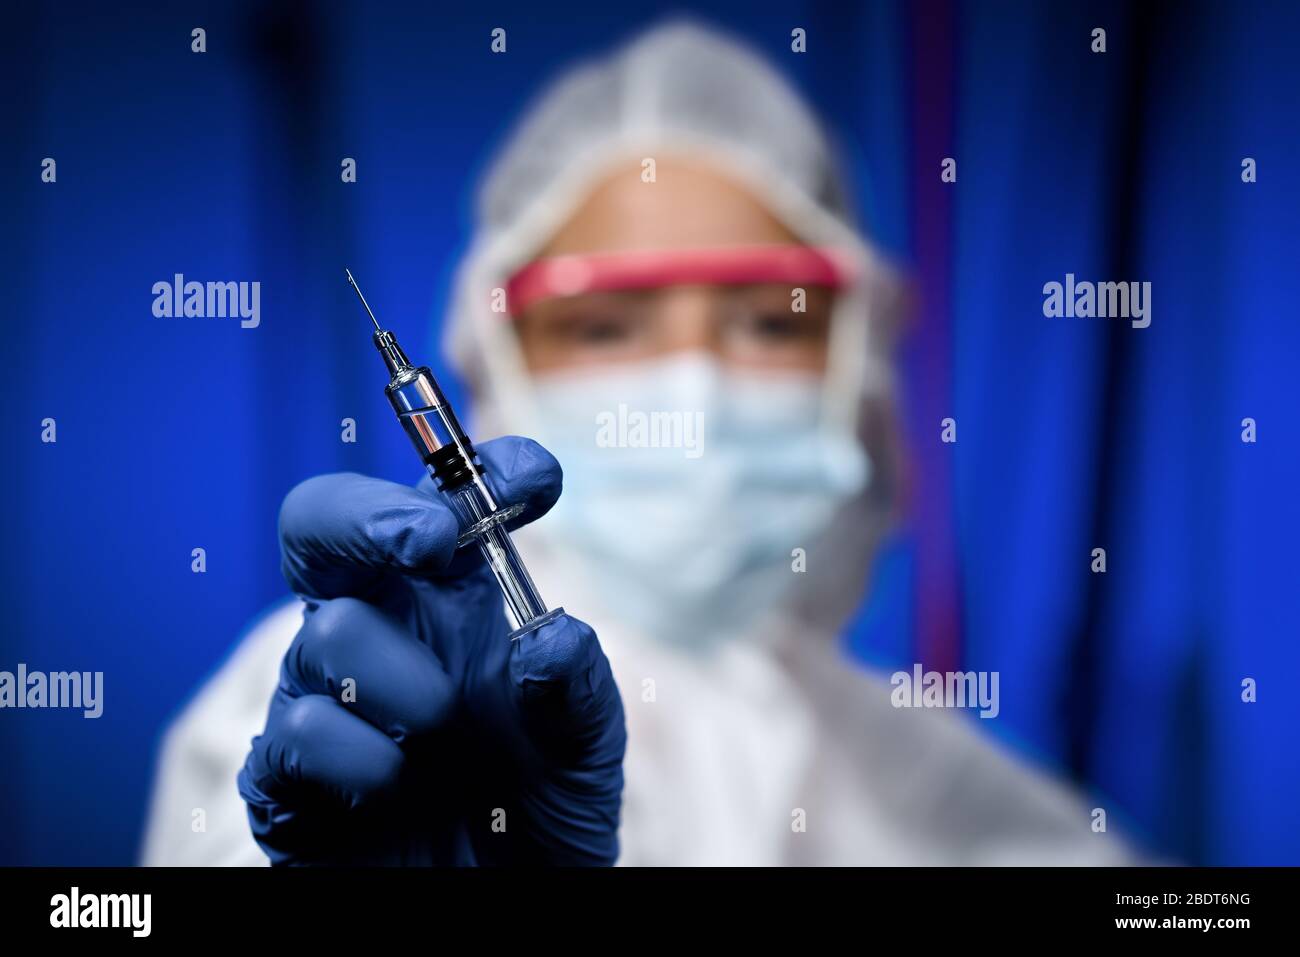 Helath care worker doctor with vaccine syringe for vaccination inoculation inoculate vaccinate aginst virus Stock Photo